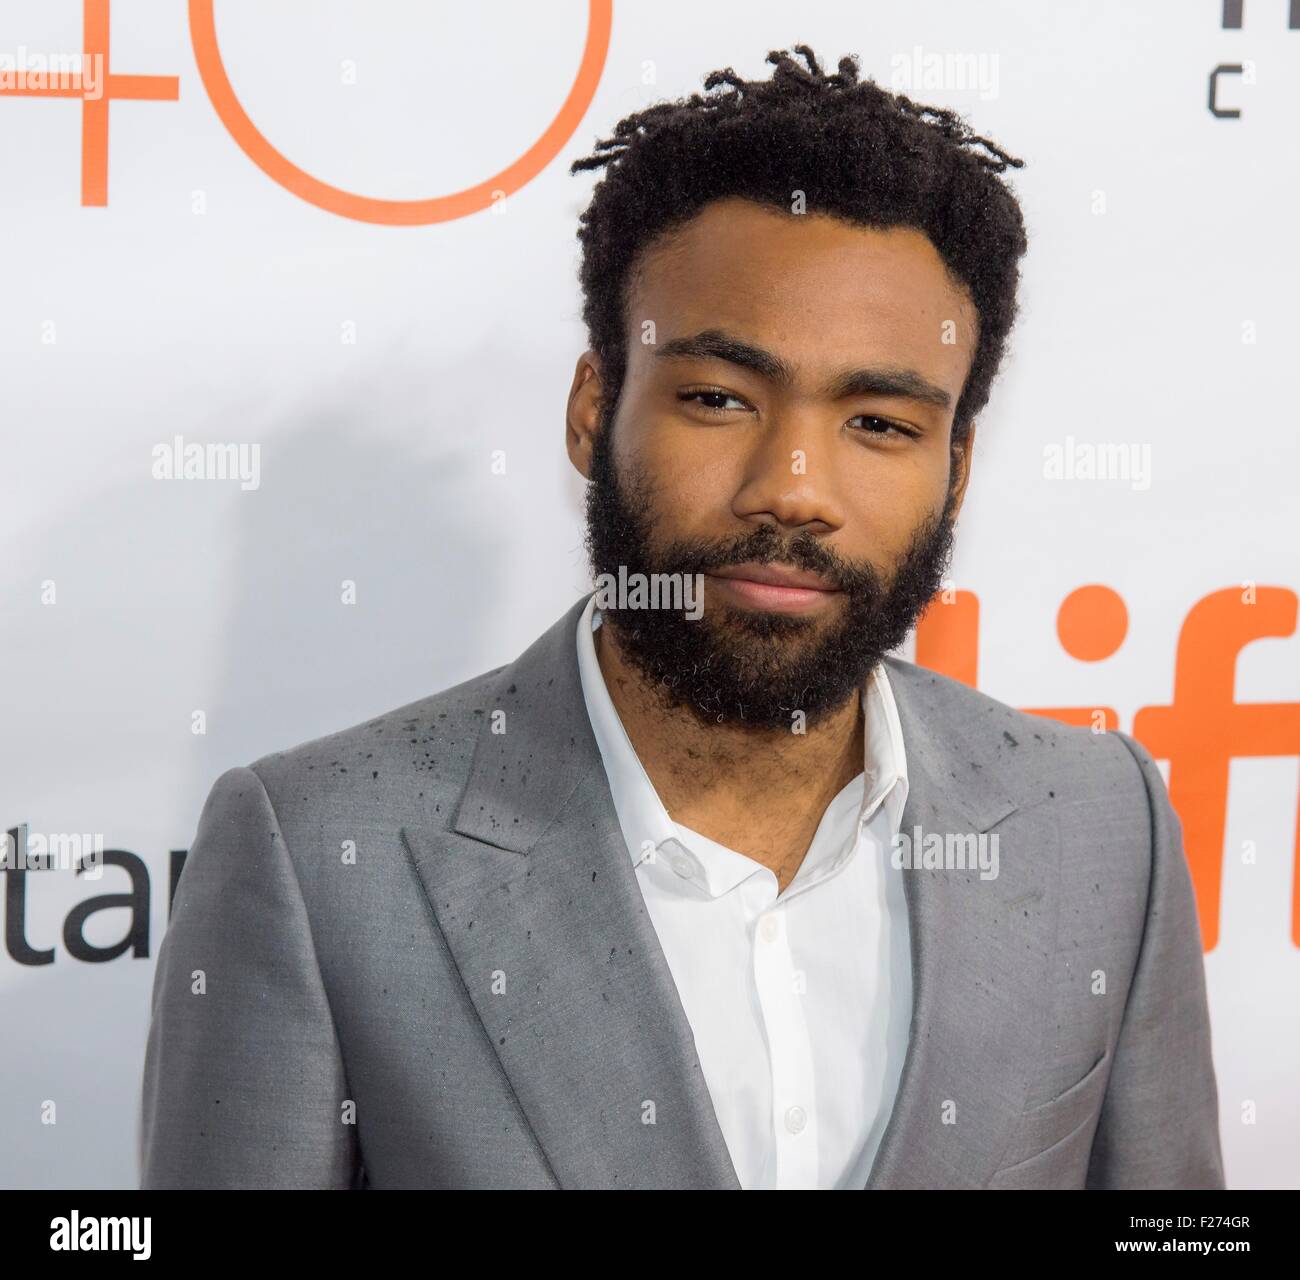 Actor Donald Glover attends the world premiere for The Martian at the Toronto International Film Festival at the Roy Thomson Hall September 11, 2015 in Toronto, Canada. Stock Photo